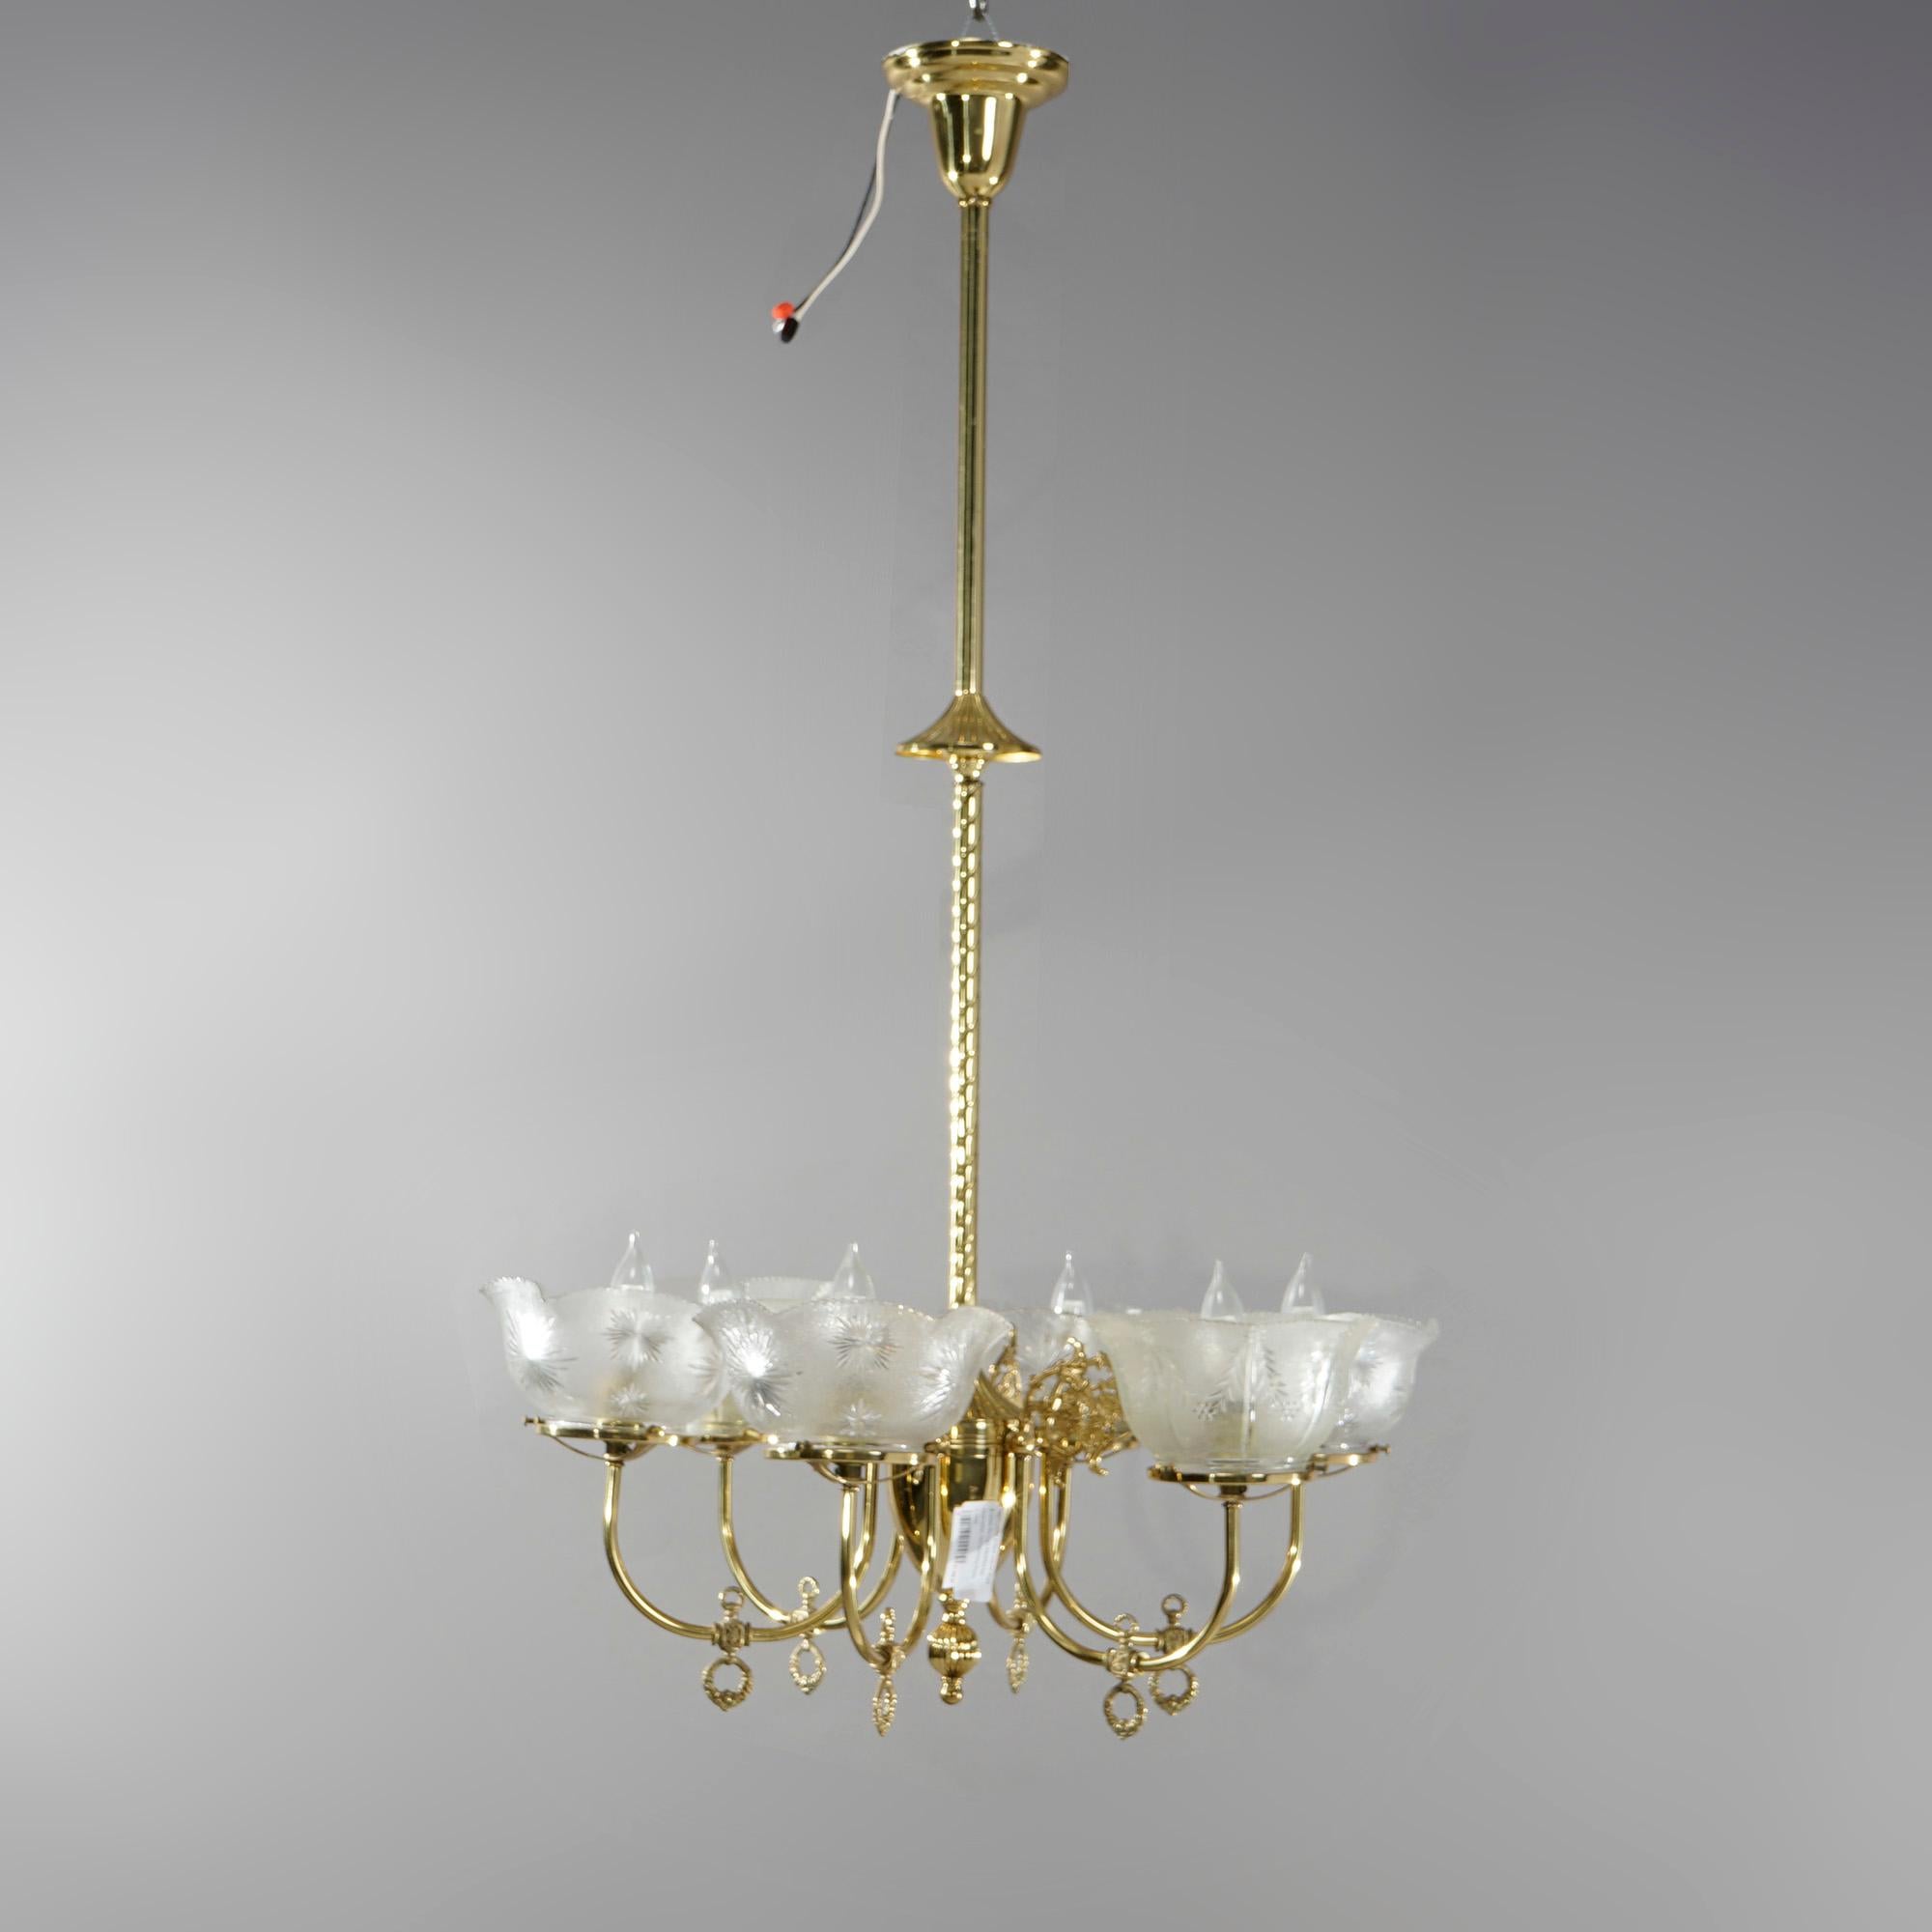 An antique Victorian electrified gas chandelier offers brass frame with rope twist shaft having six scroll form arms terminating in etched glass shades (non-matching), c1890

Measures - 44.5''H x 24''W x 24''D.

Catalogue Note: Ask about DISCOUNTED